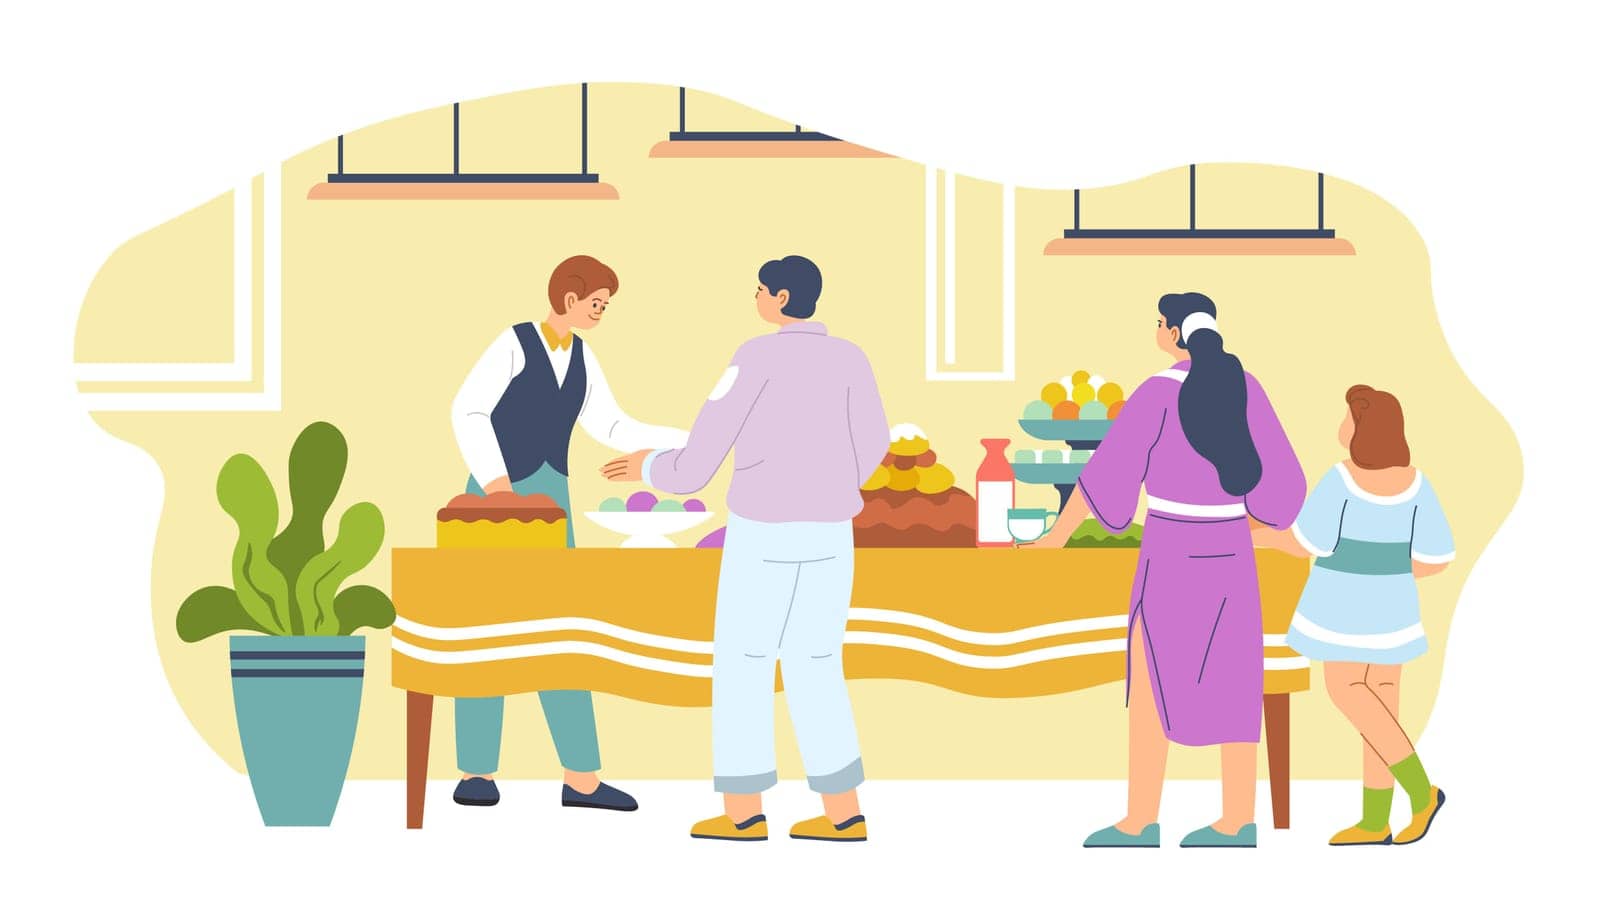 Buffer for clients of hotel, people taking food and dishes from table. Hostel or model offering tasty meal in morning, all inclusive for clients. Tourists on vacation or holiday. Vector in flat style